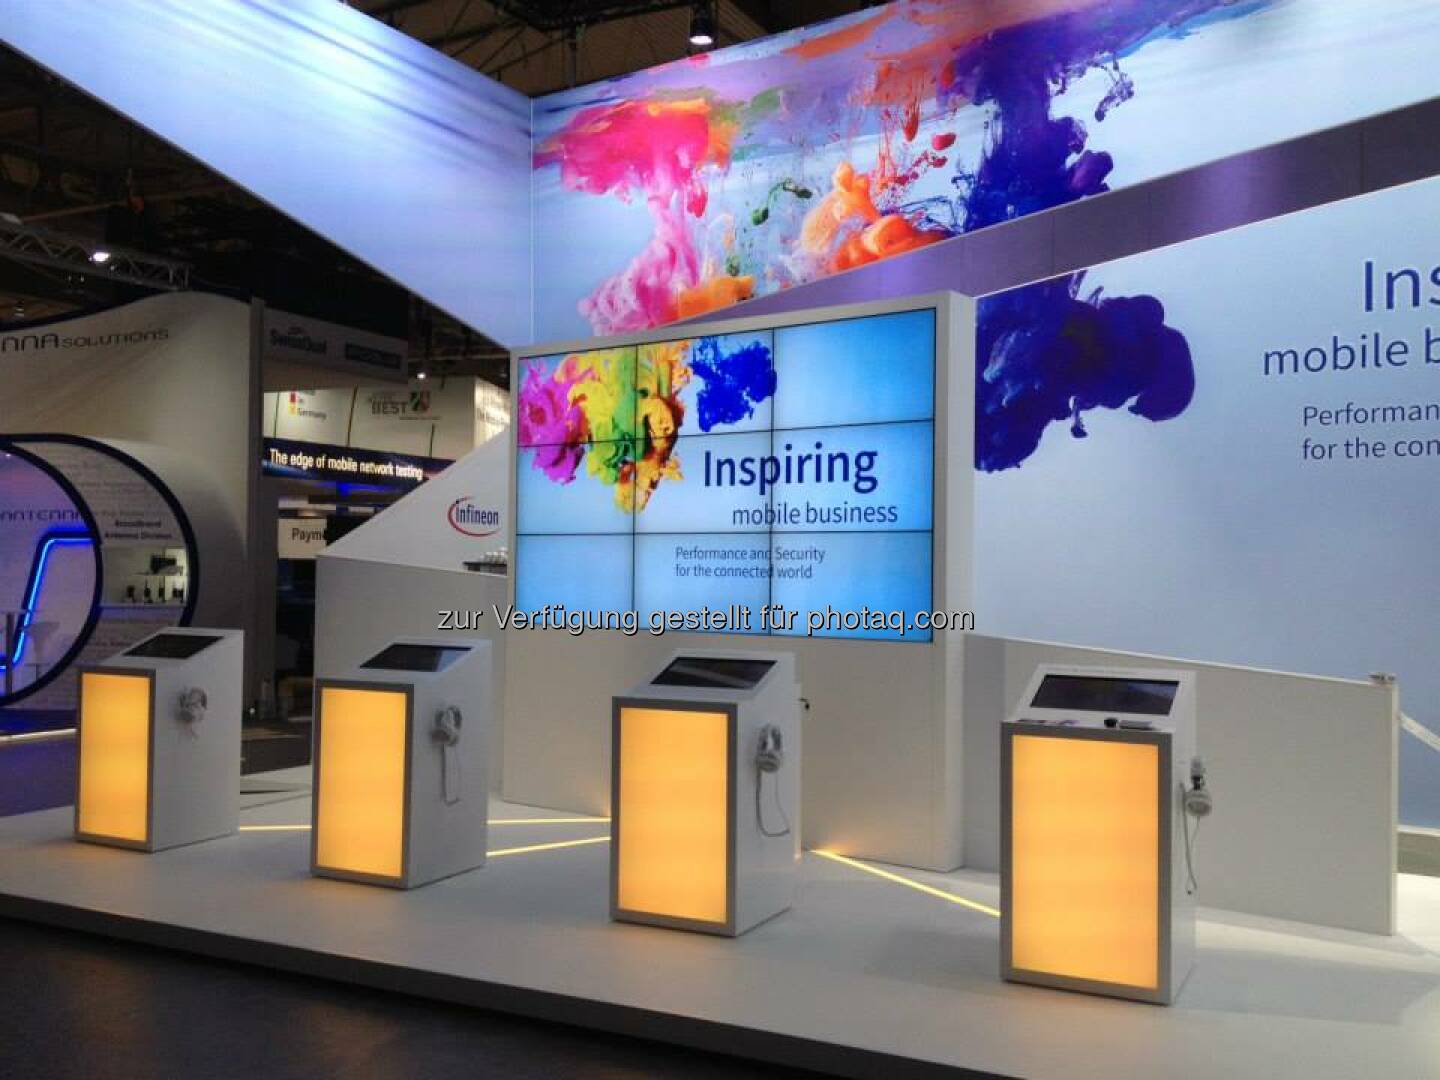 Infineon - have you visited our booth on #MWC15 in Barcelona? Here are some images: 
https://www.facebook.com/media/set/?set=a.798806953535421.1073741912.345383962211058&type=3 Inspiring Mobile Business - Performance and Security for the connected world. #mwc15 Hall 6, Booth 6B62
Read more: http://www.infineon.com/mwc Source: http://facebook.com/Infineon